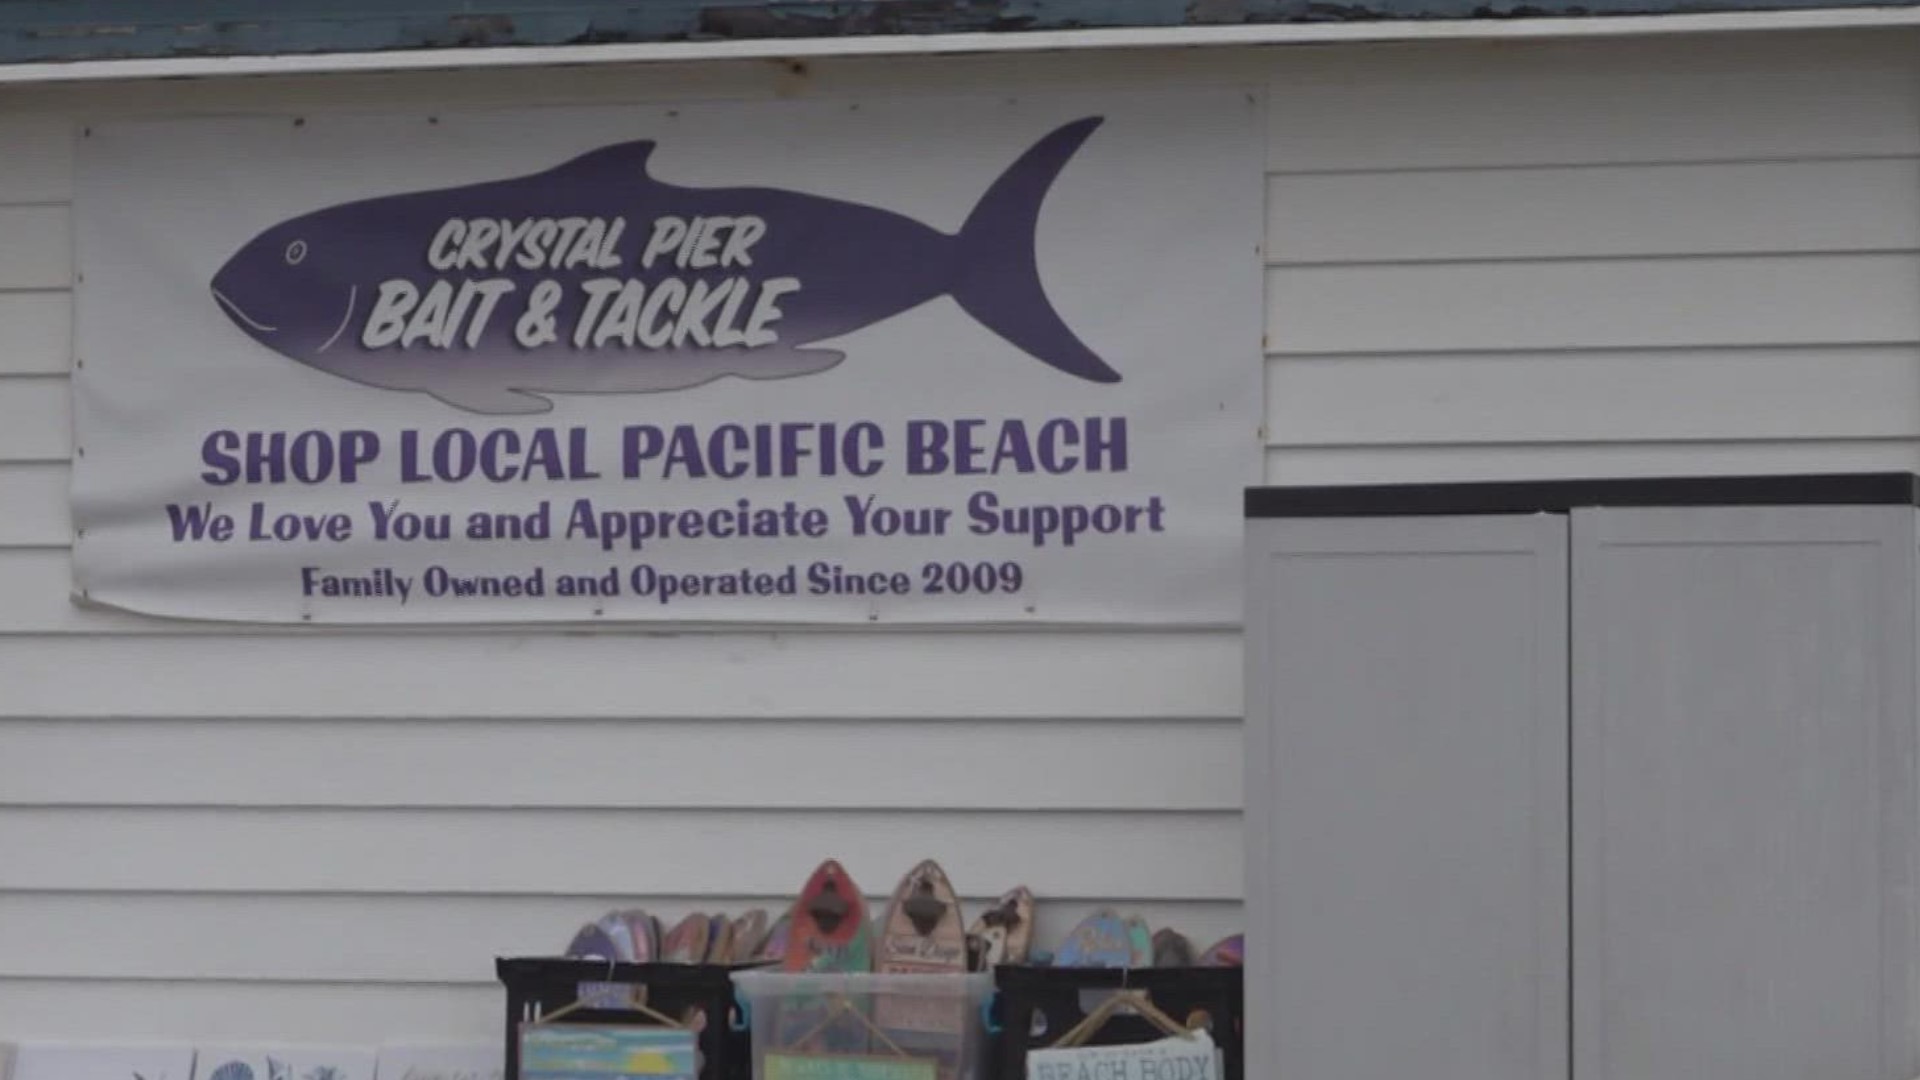 The Crystal Pier Bait and tackle shop will no longer close after Memorial Day on May 31. Instead, they're being allowed to stay open until July 22.